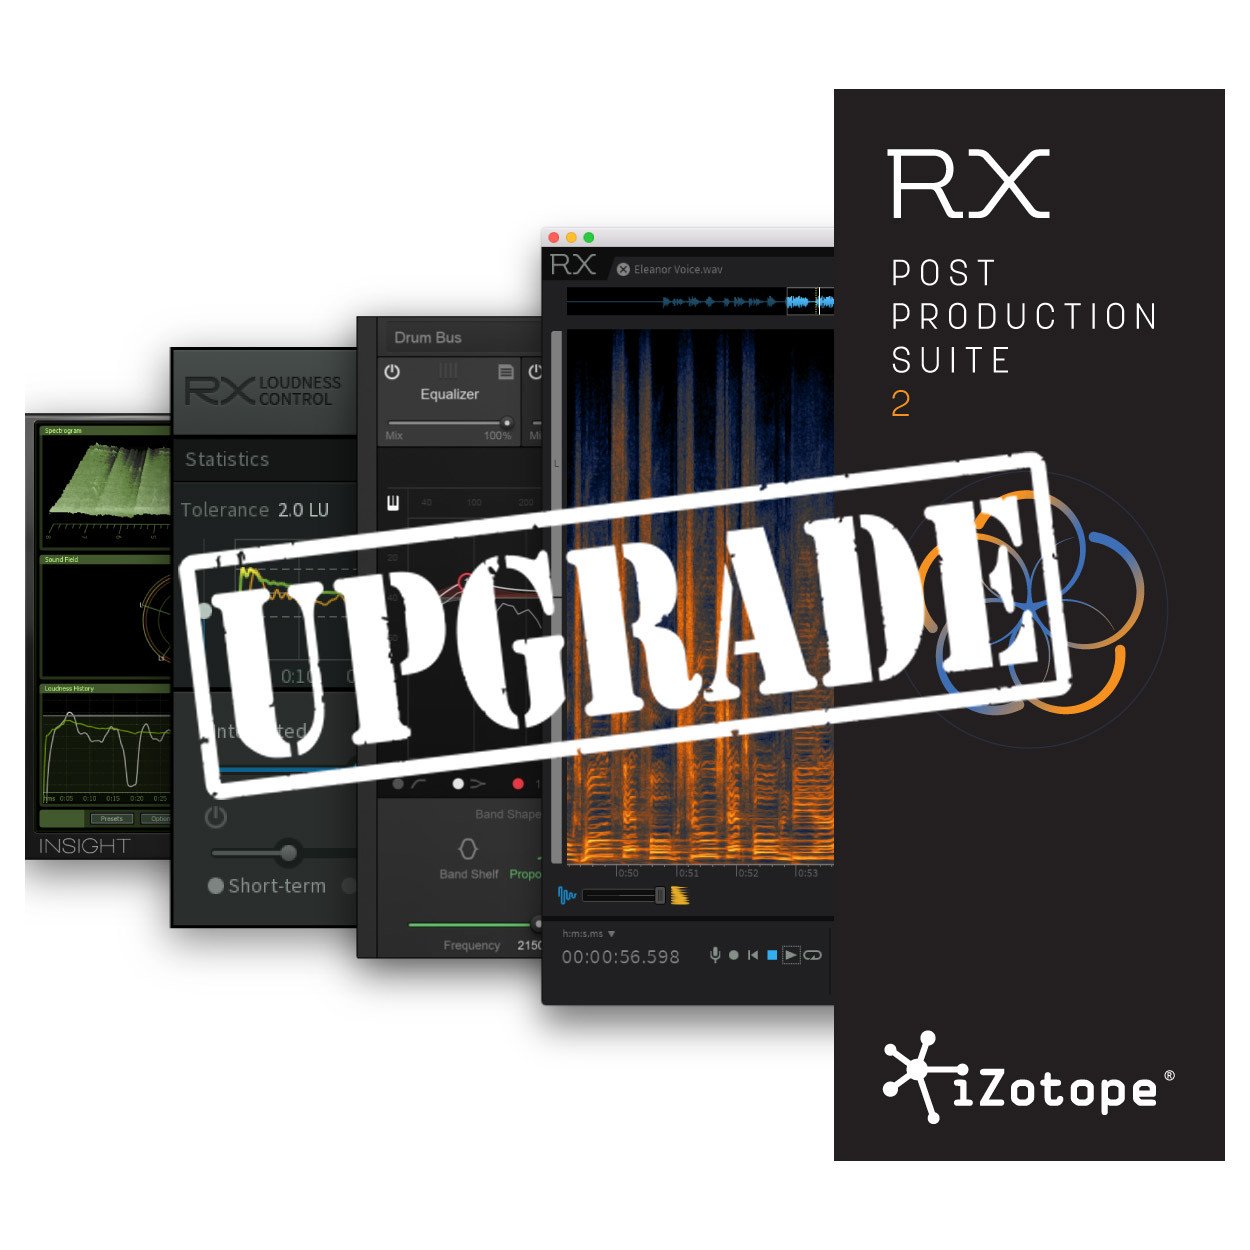 Izotope rx 5 to 6 upgrade 2